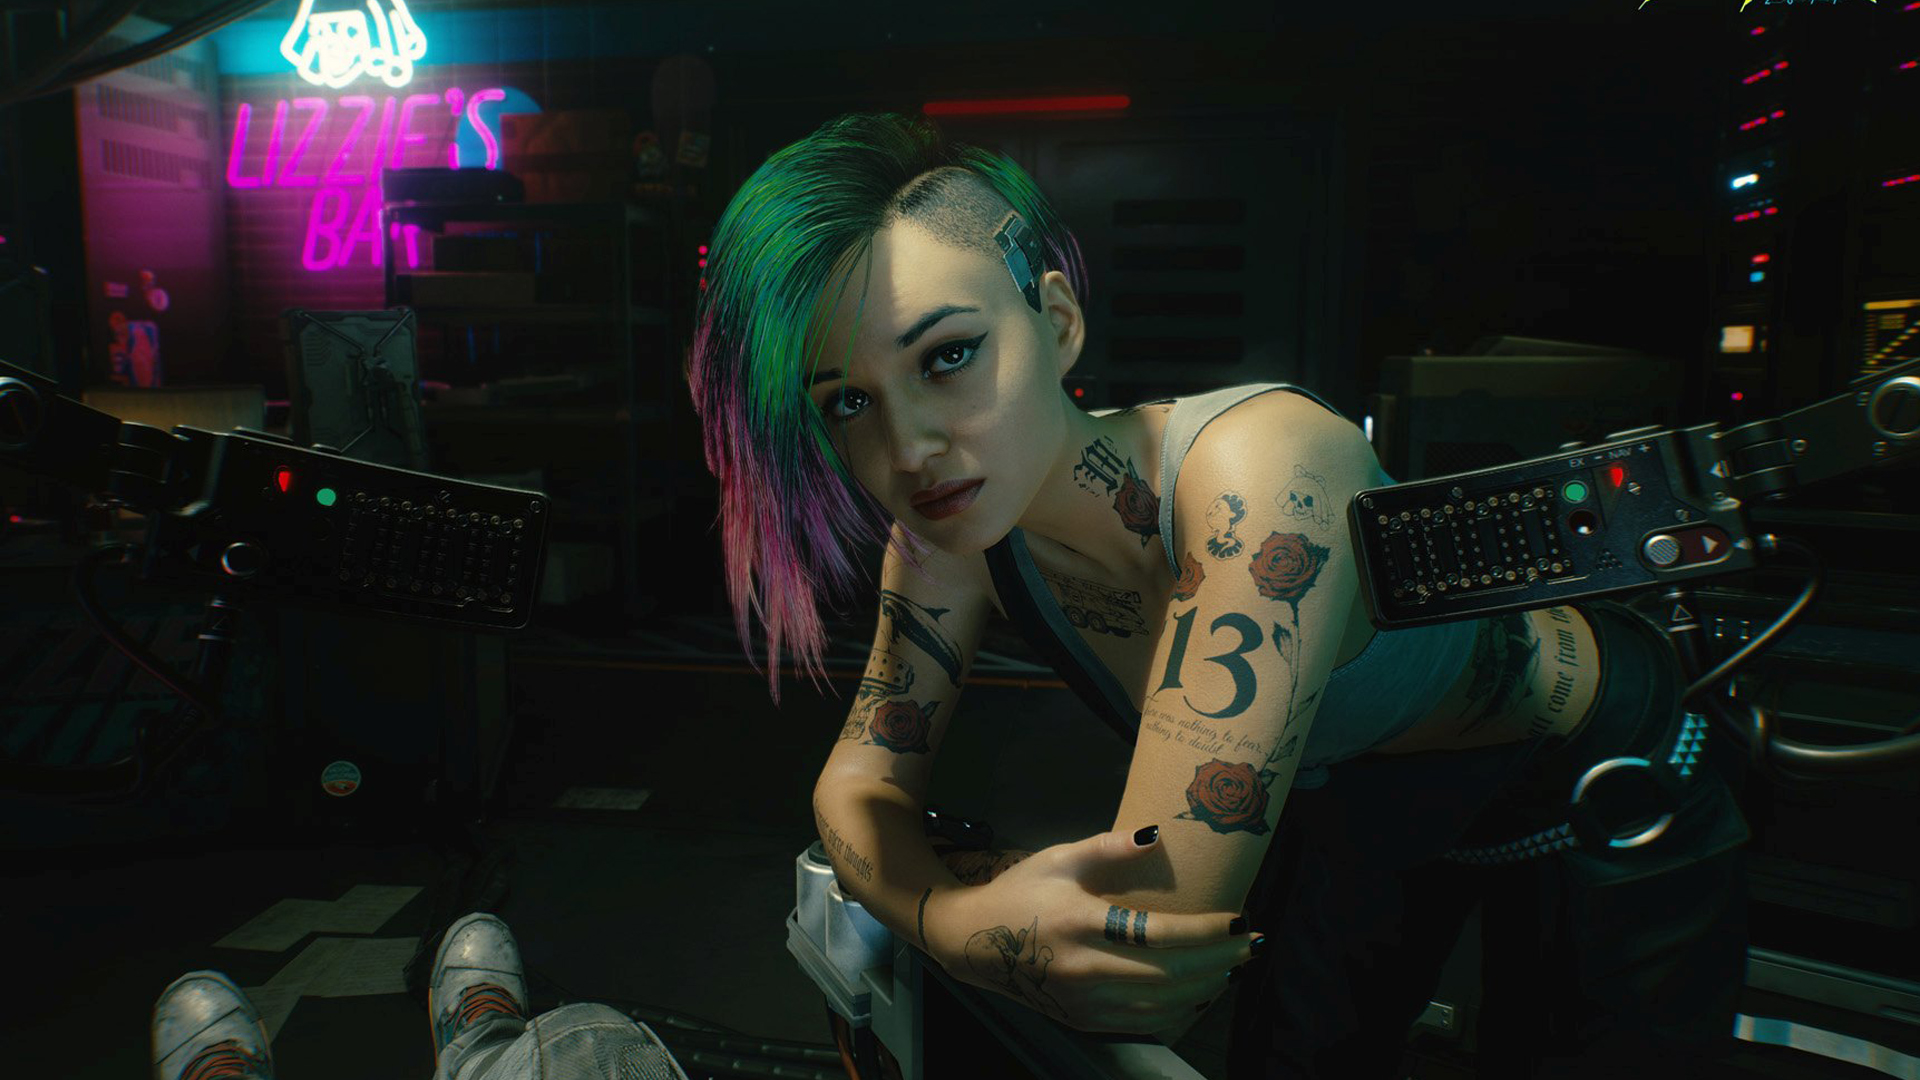 Cyberpunk 2077 Fans Plead To CD Projekt Red Over What To Include In 1.4 Update – Gameranx